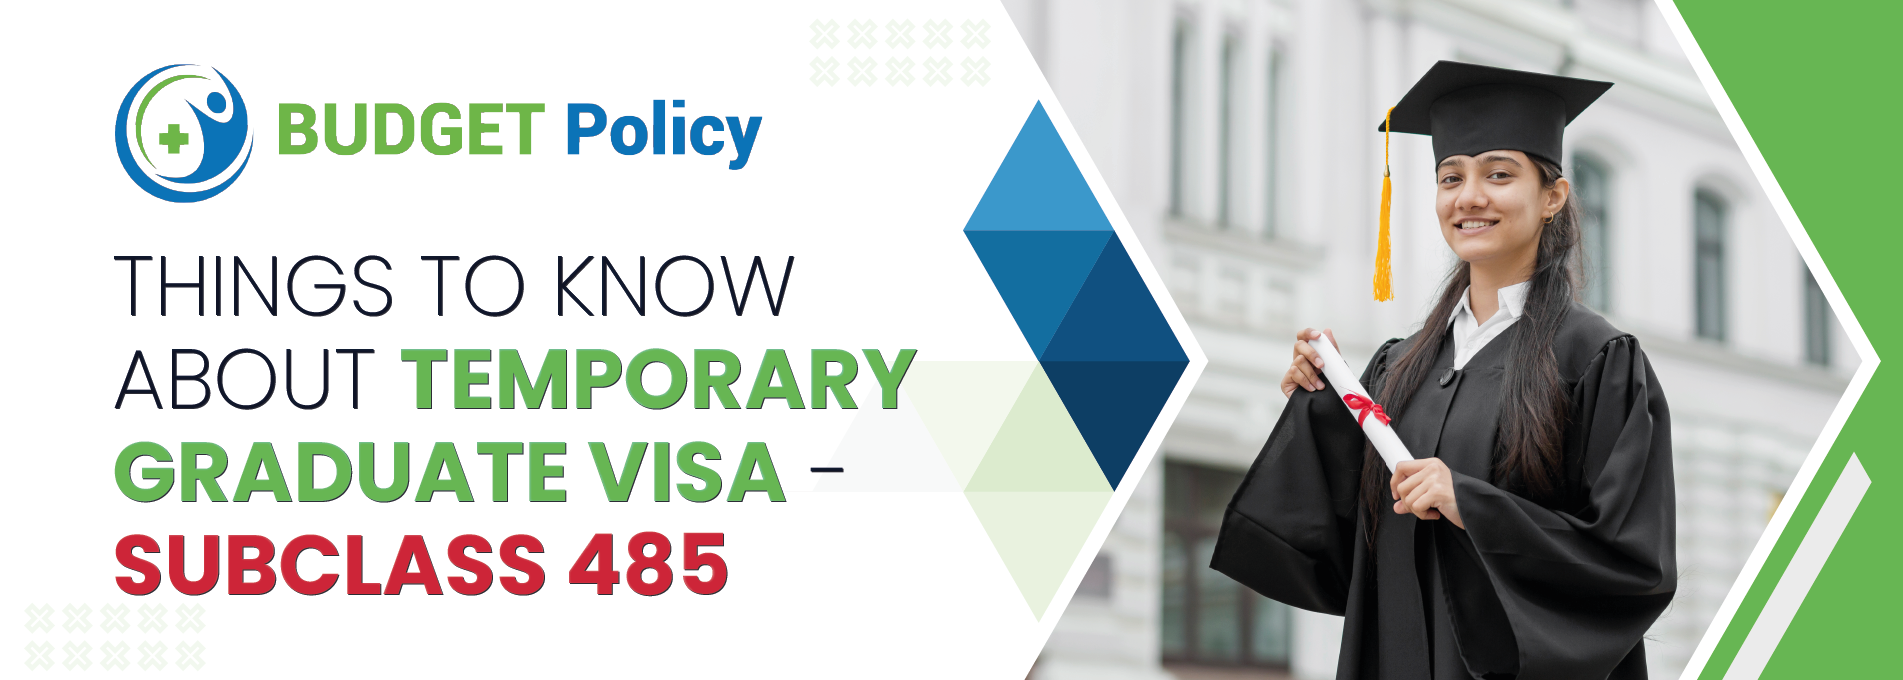 Things to Know About Temporary Graduate visa - Subclass 485